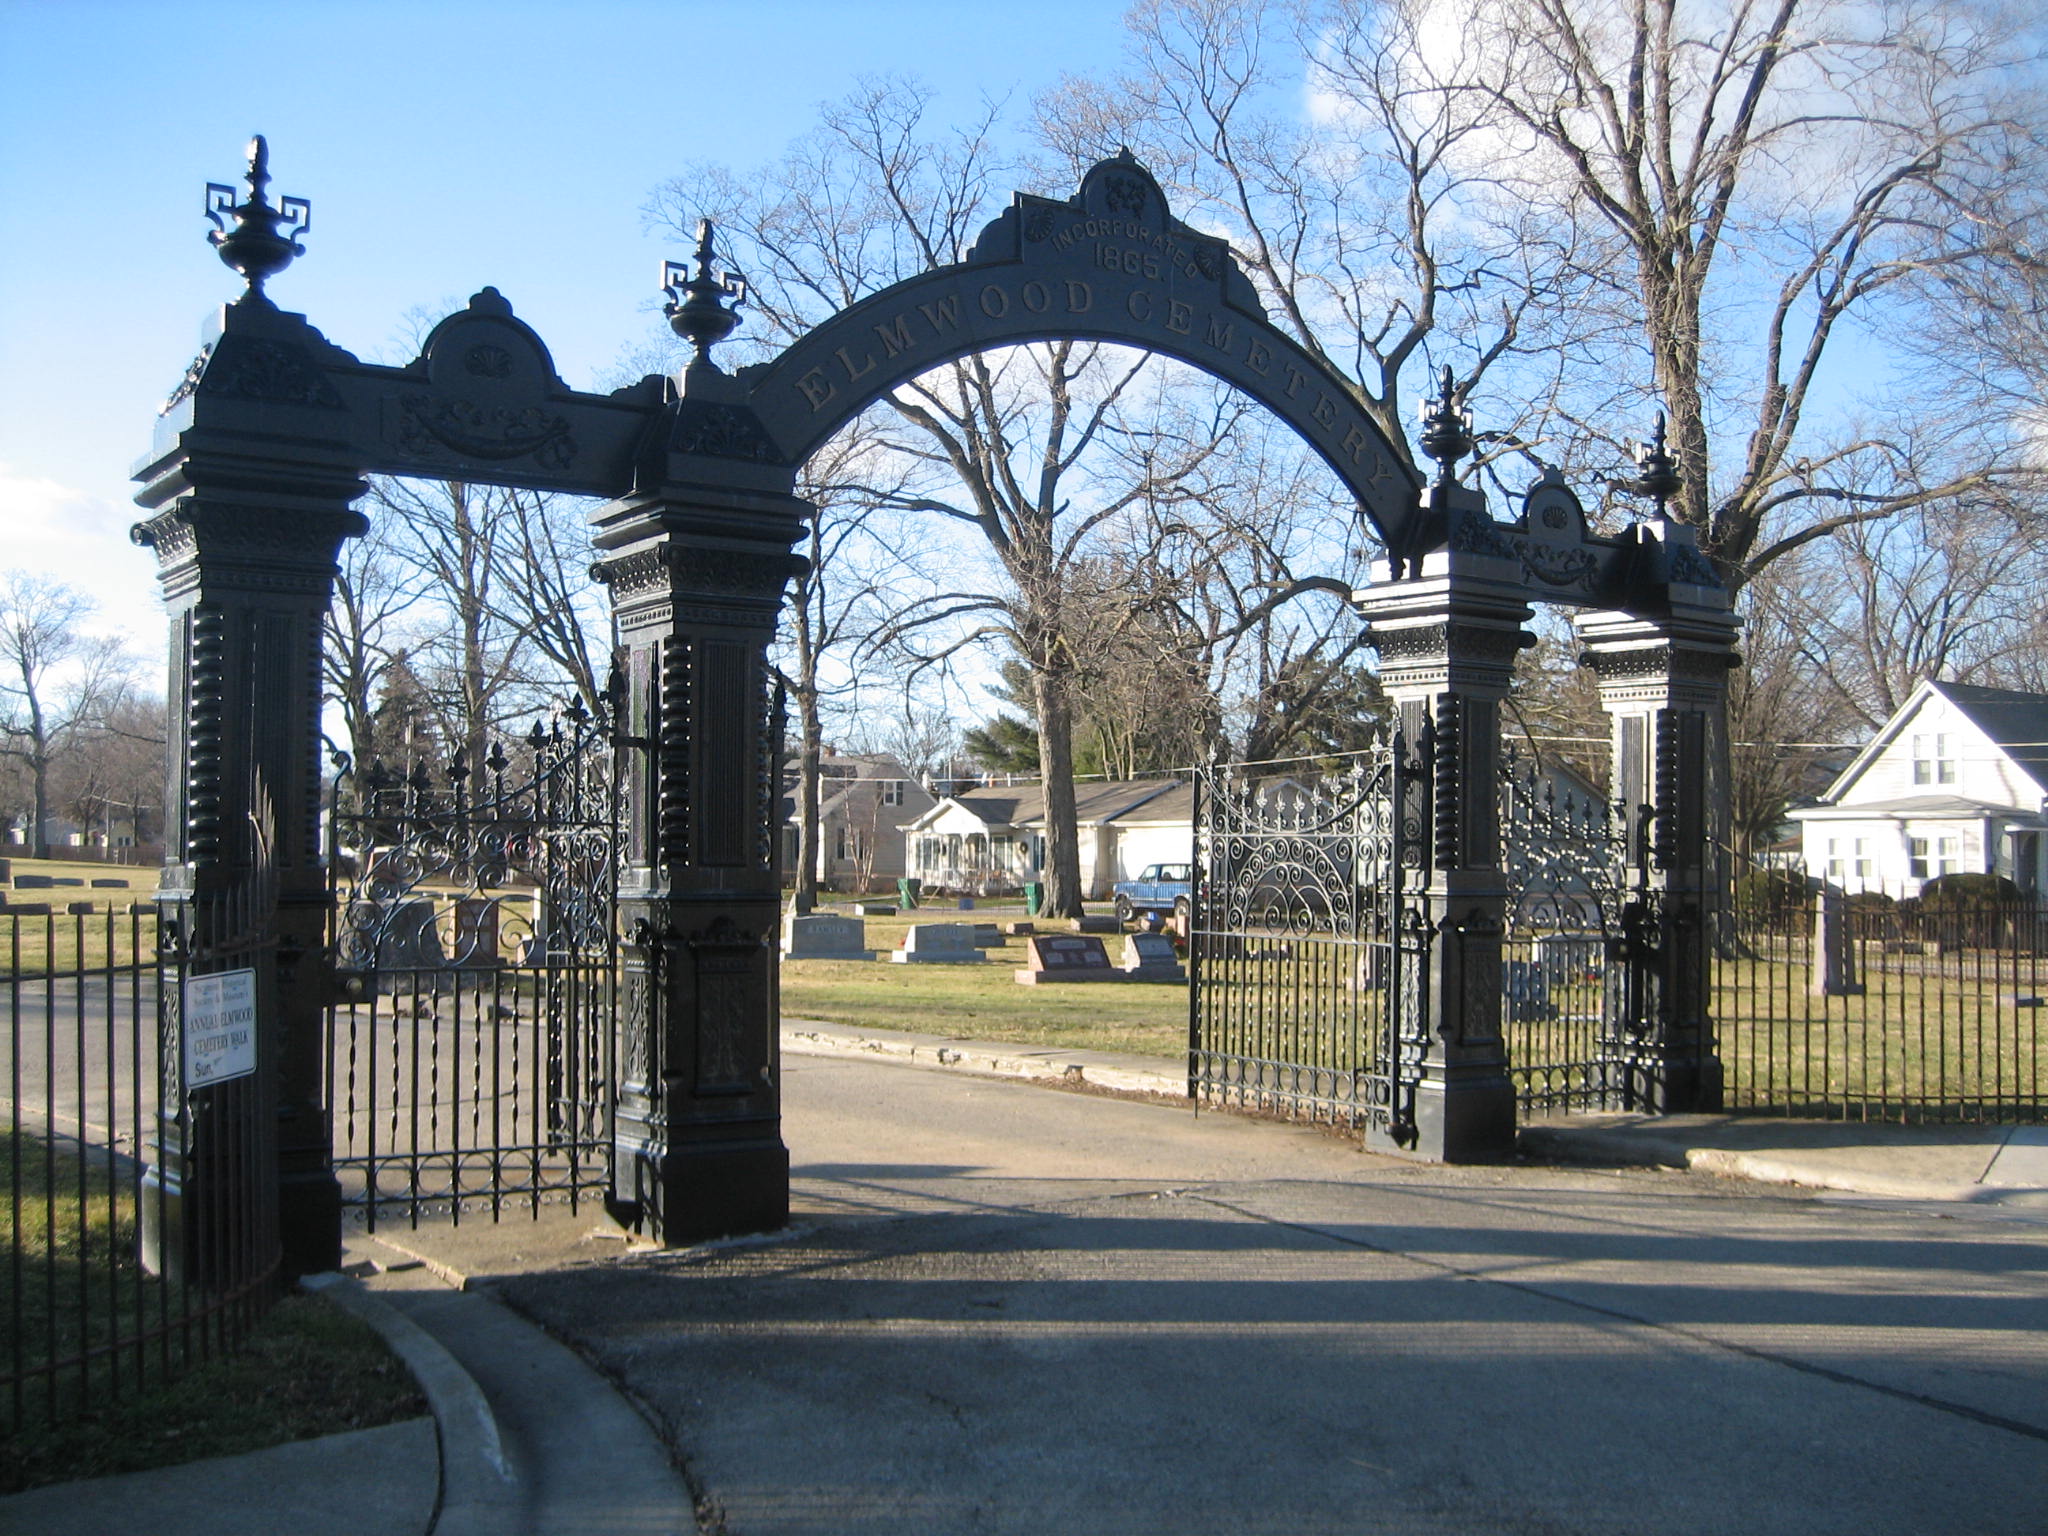 The gates to a cemetery.